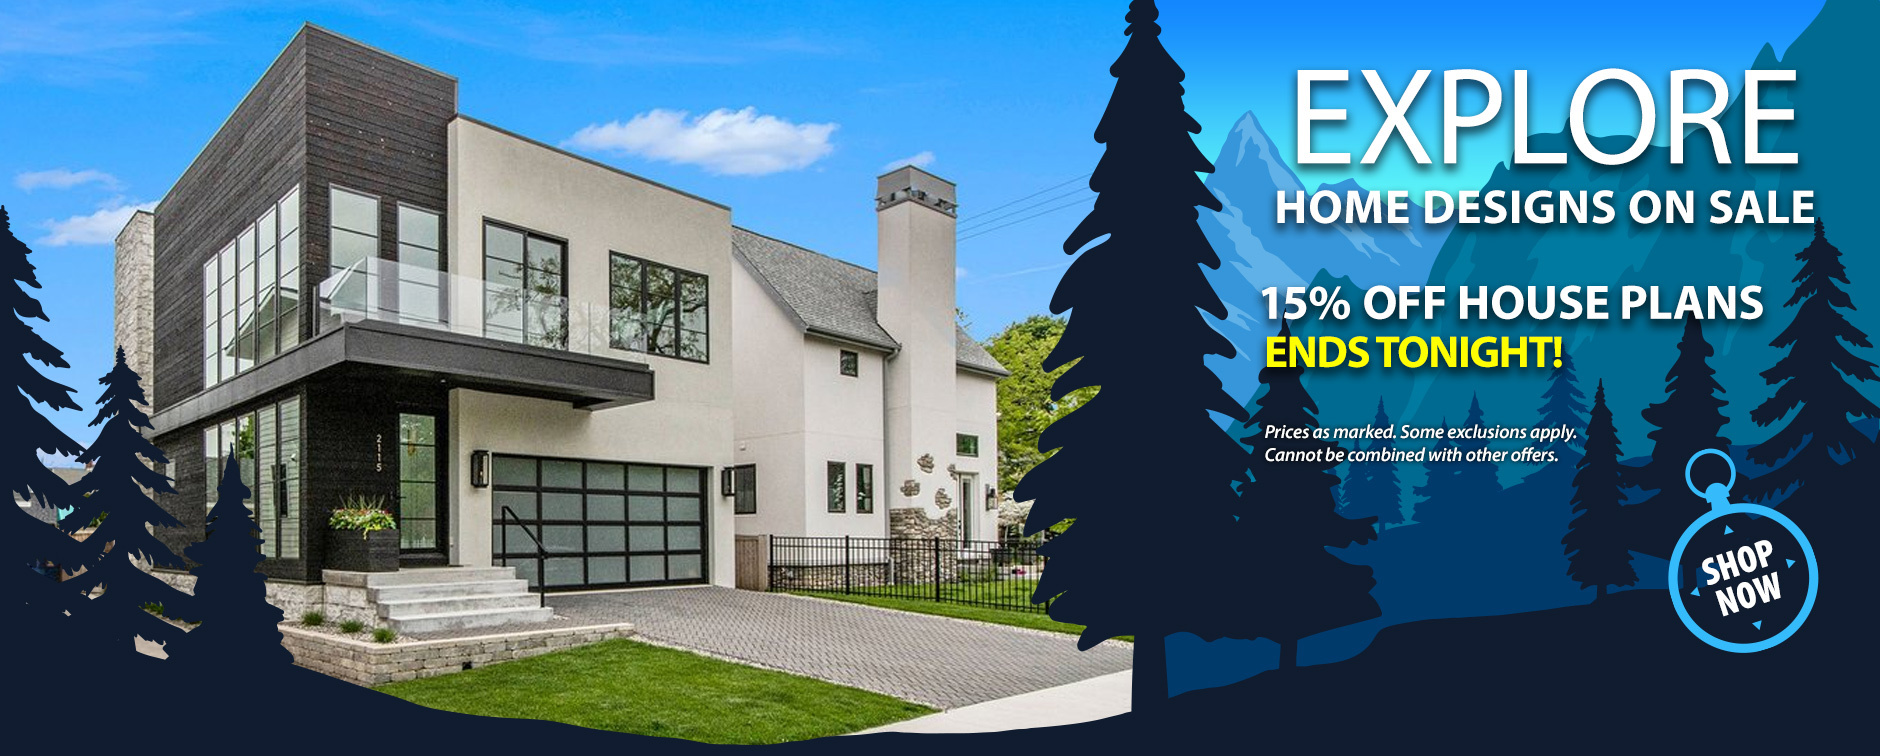 Dreamy House Plan Sale: 15% Off Thousands of Designs Ends Tonight